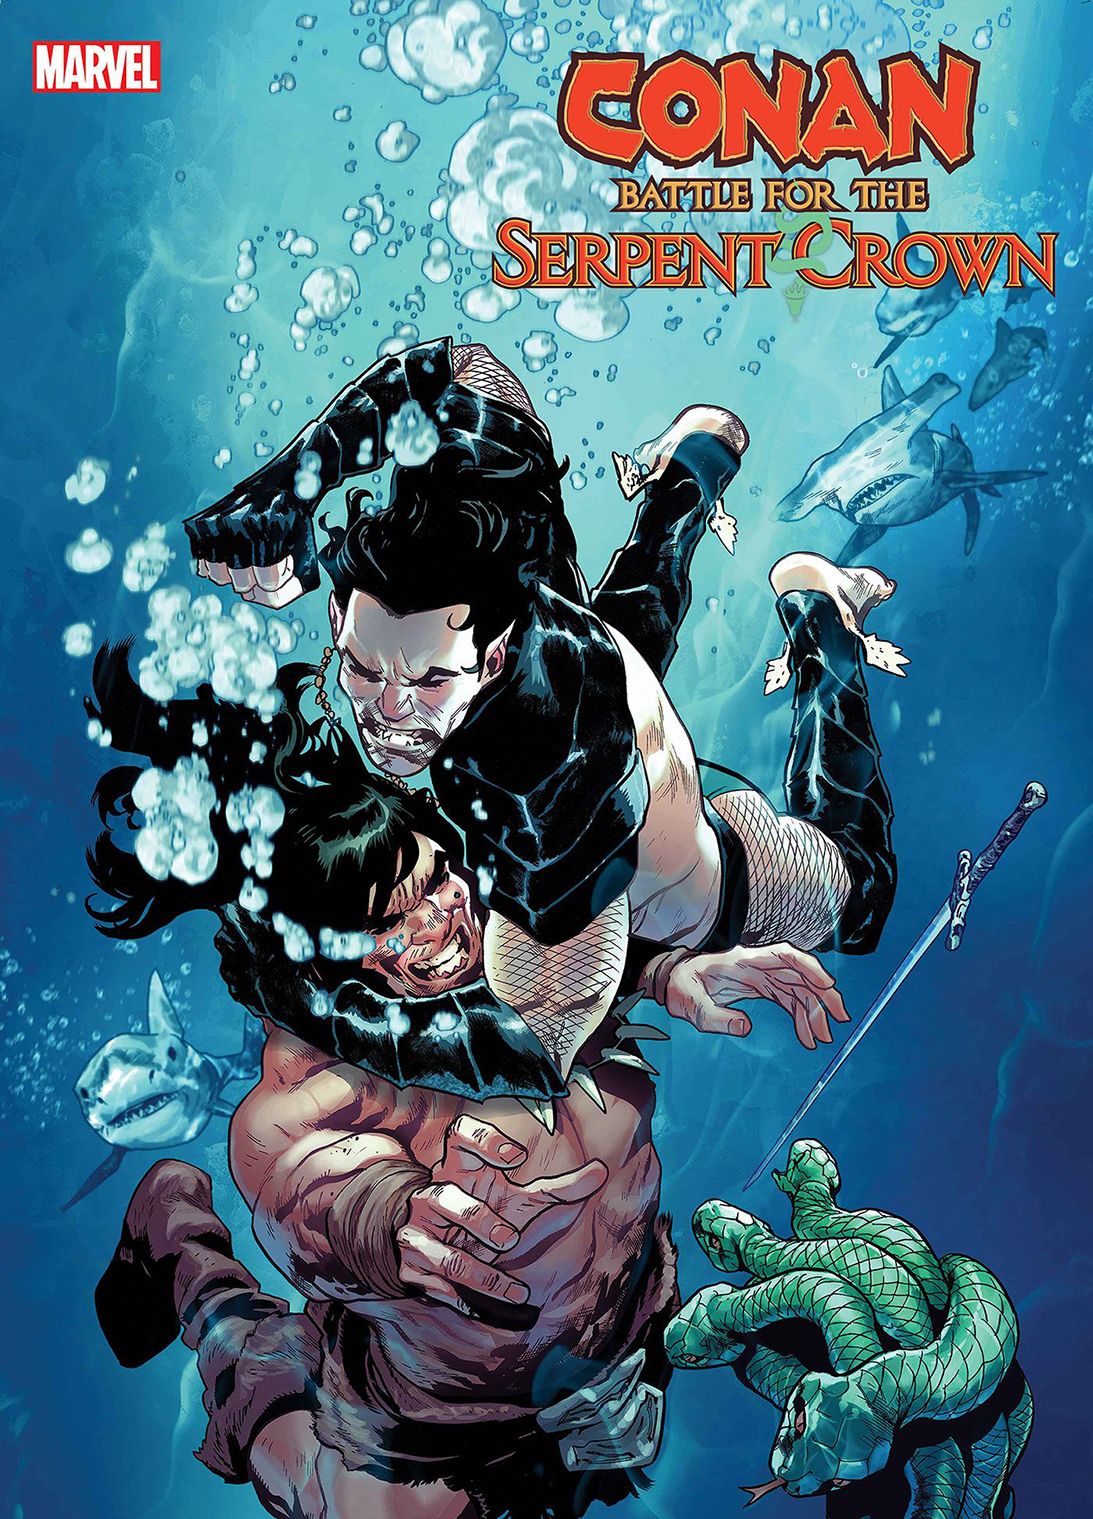 It’s Conan The Barbarian vs. NAMOR For ‘The Serpent Crown’